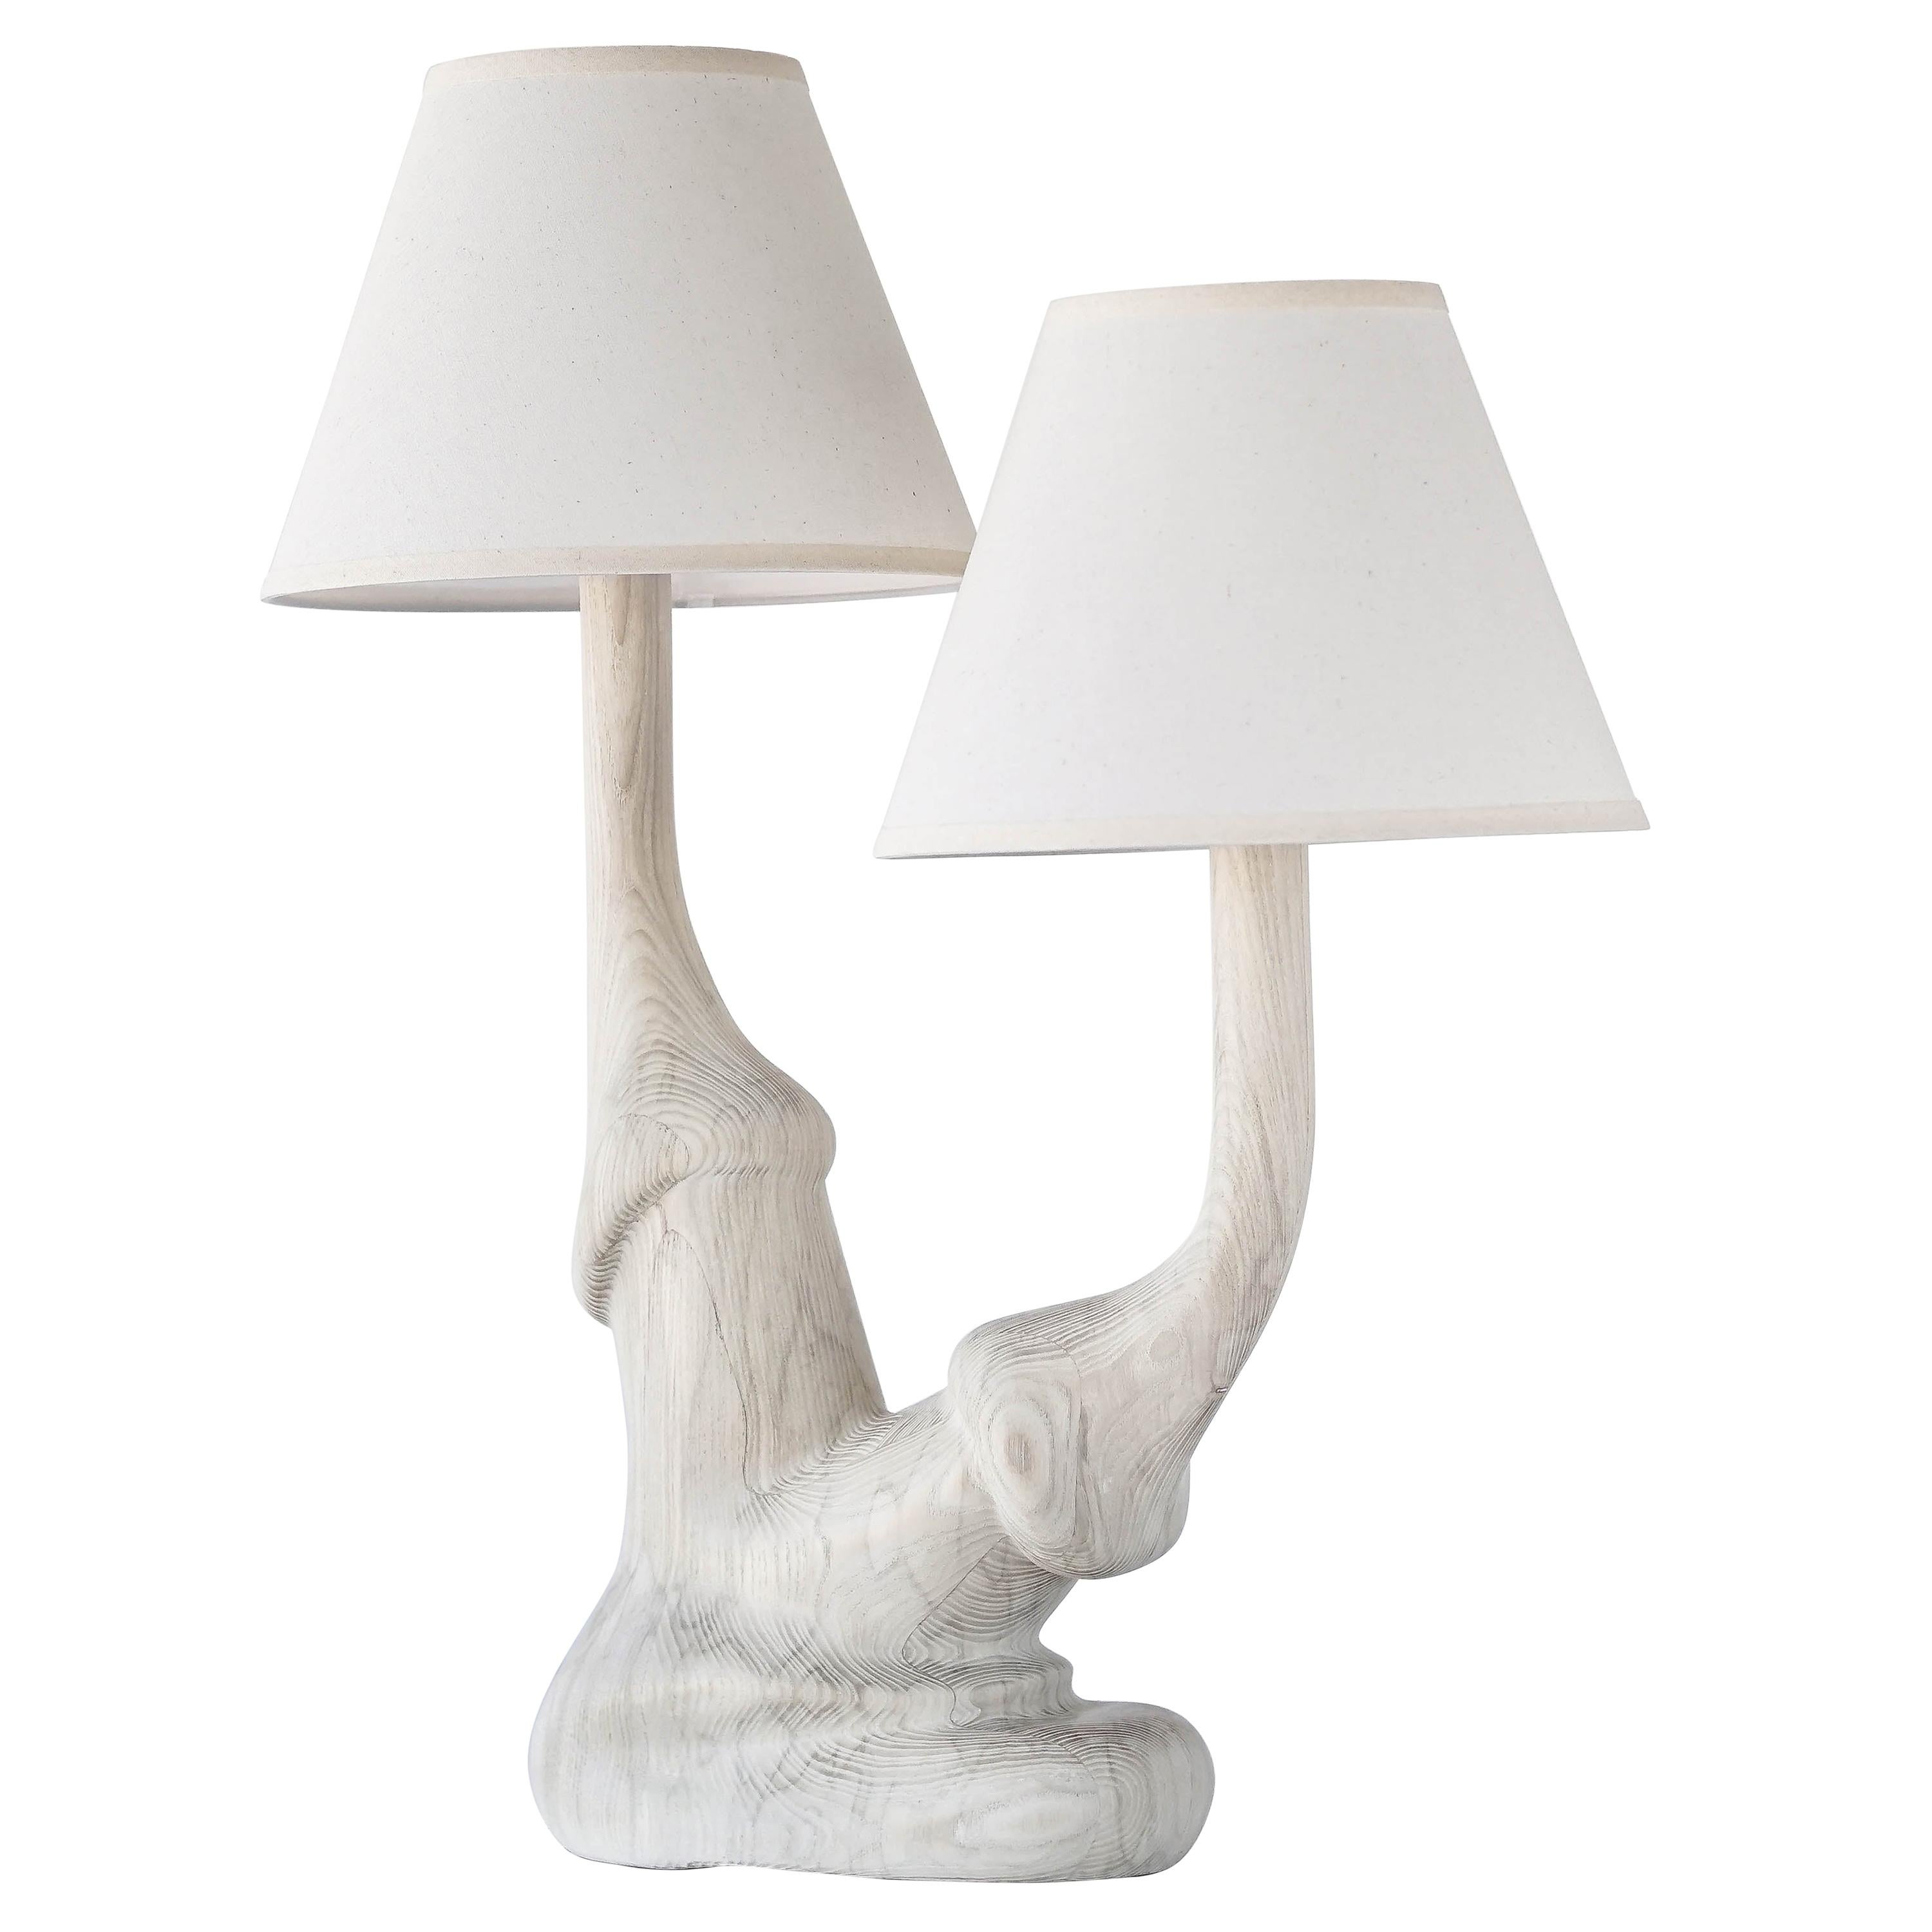 Carved Solid White Oak Wood Organic Table Lamp with Double Linen Lamp Shade For Sale